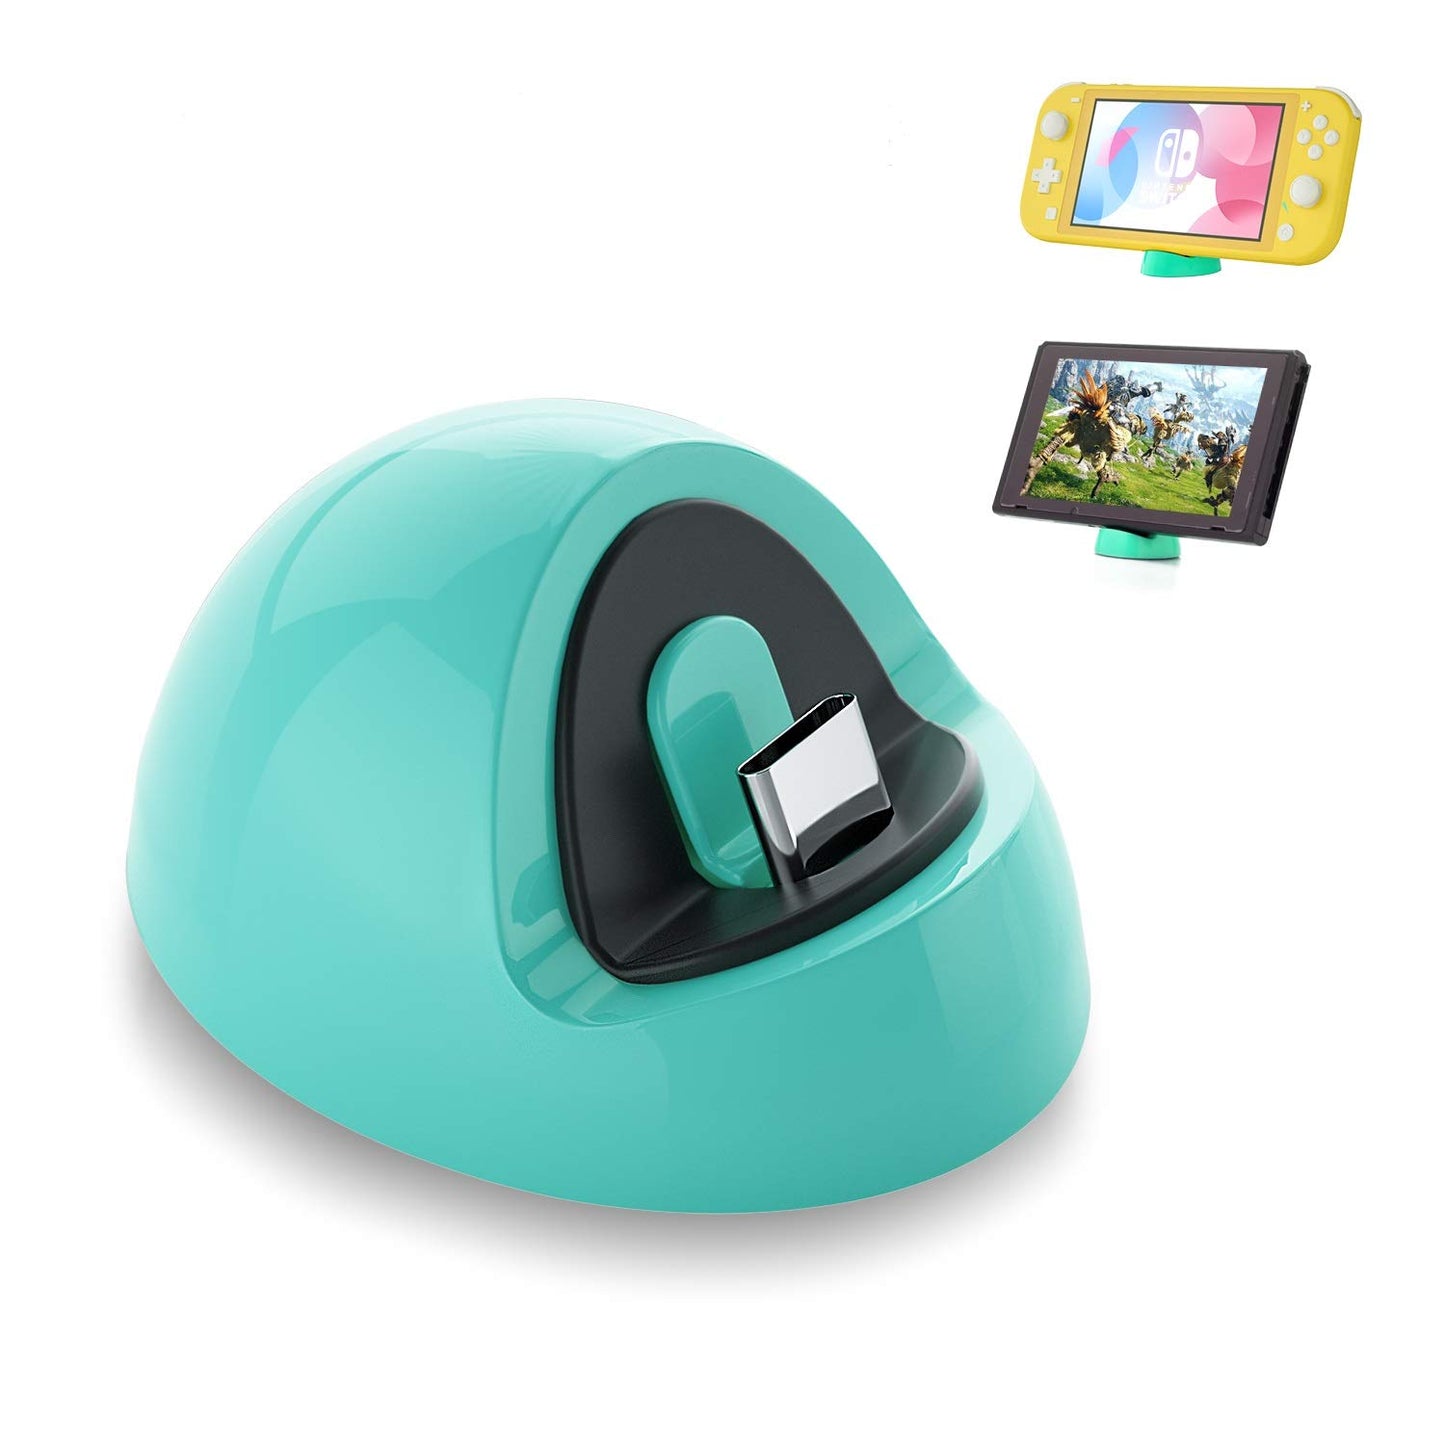 Nintendo Switch lite Charger - Green